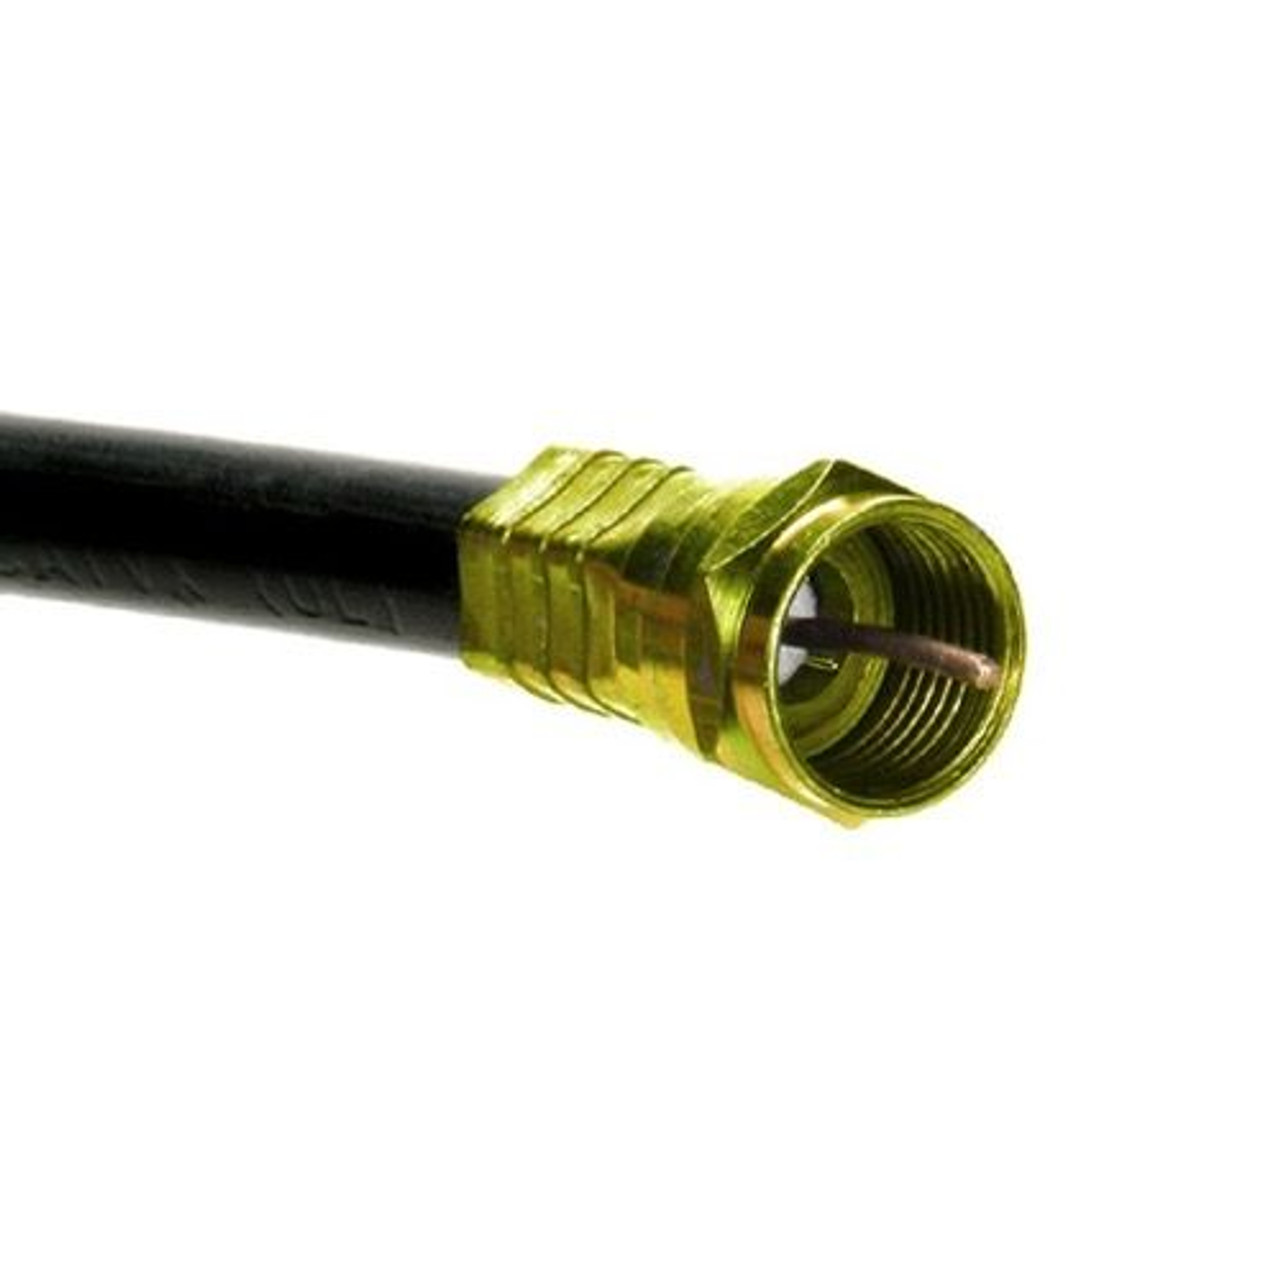 Eagle 30' FT Quad RG6 Coaxial Cable Black with Gold F-Connectors Installed Each End Quad Shielded RG-6 Jumper 75 Ohm with Heavy Compression F Connectors, CATV Quad Shielded High Resolution